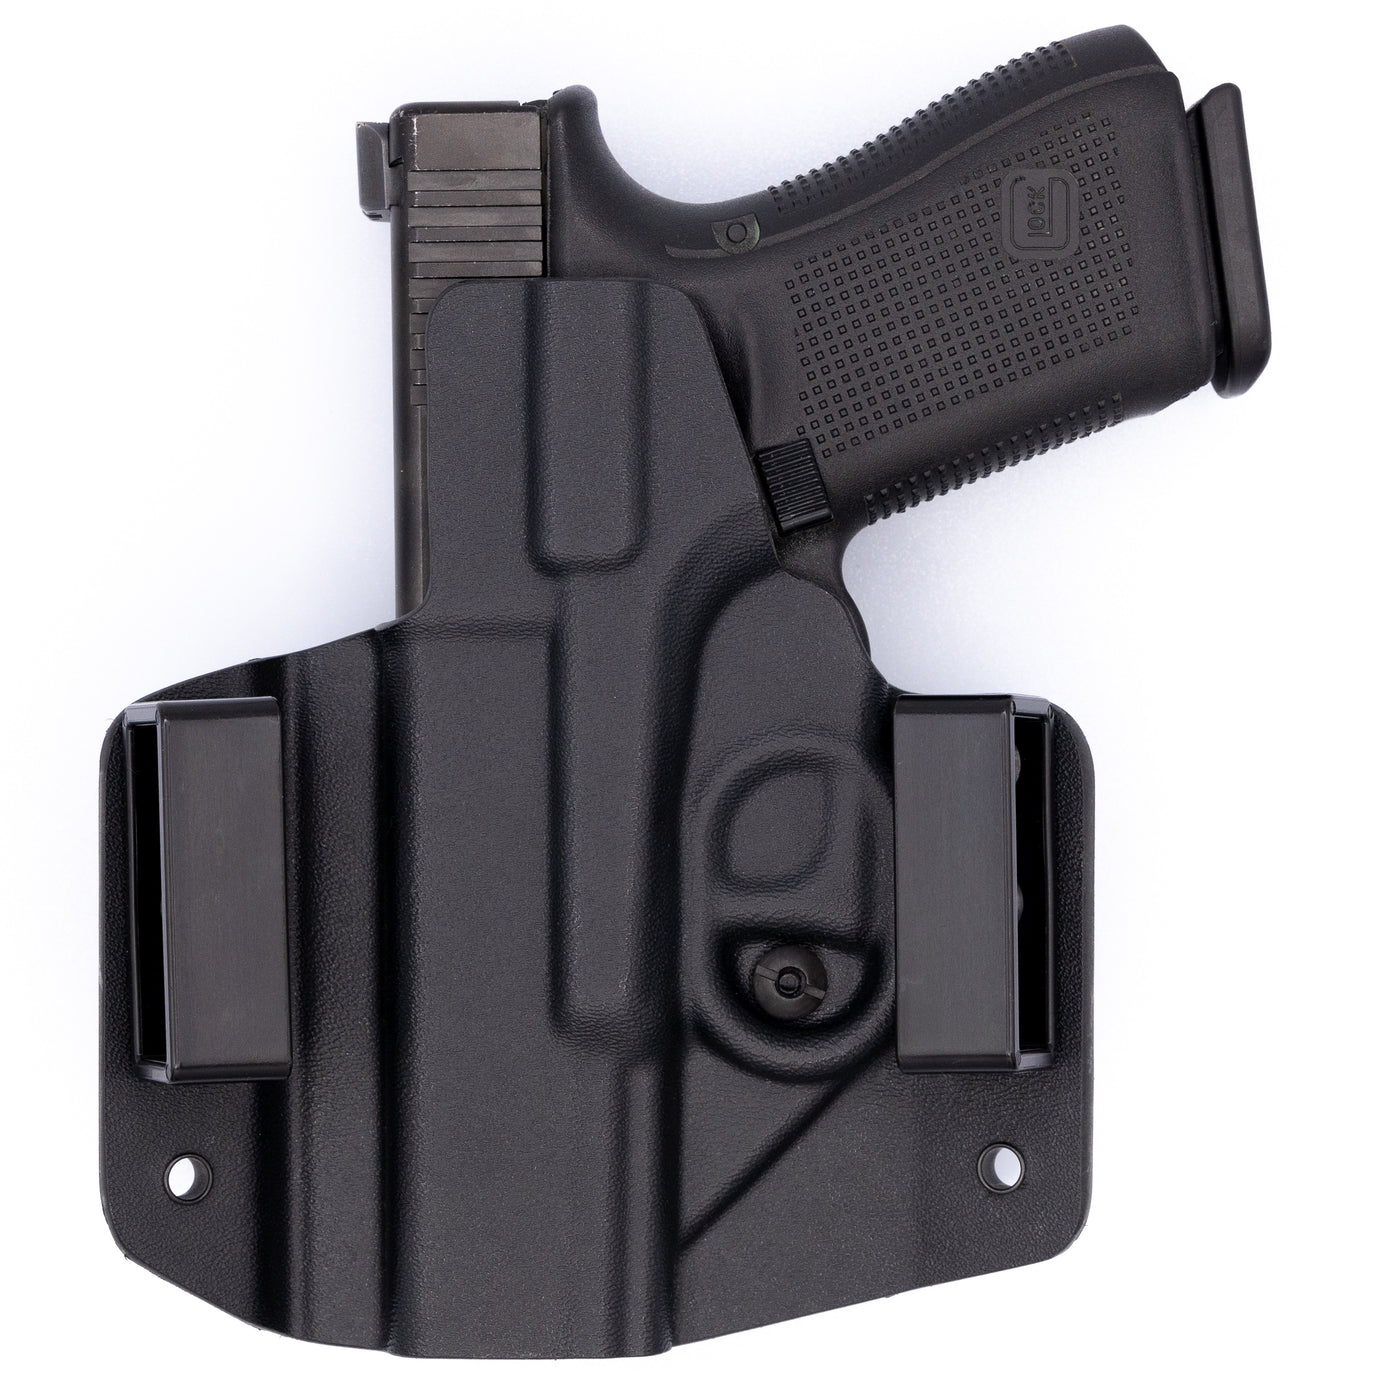 This is the cutom C&G Holsters outside the waistband holster back view